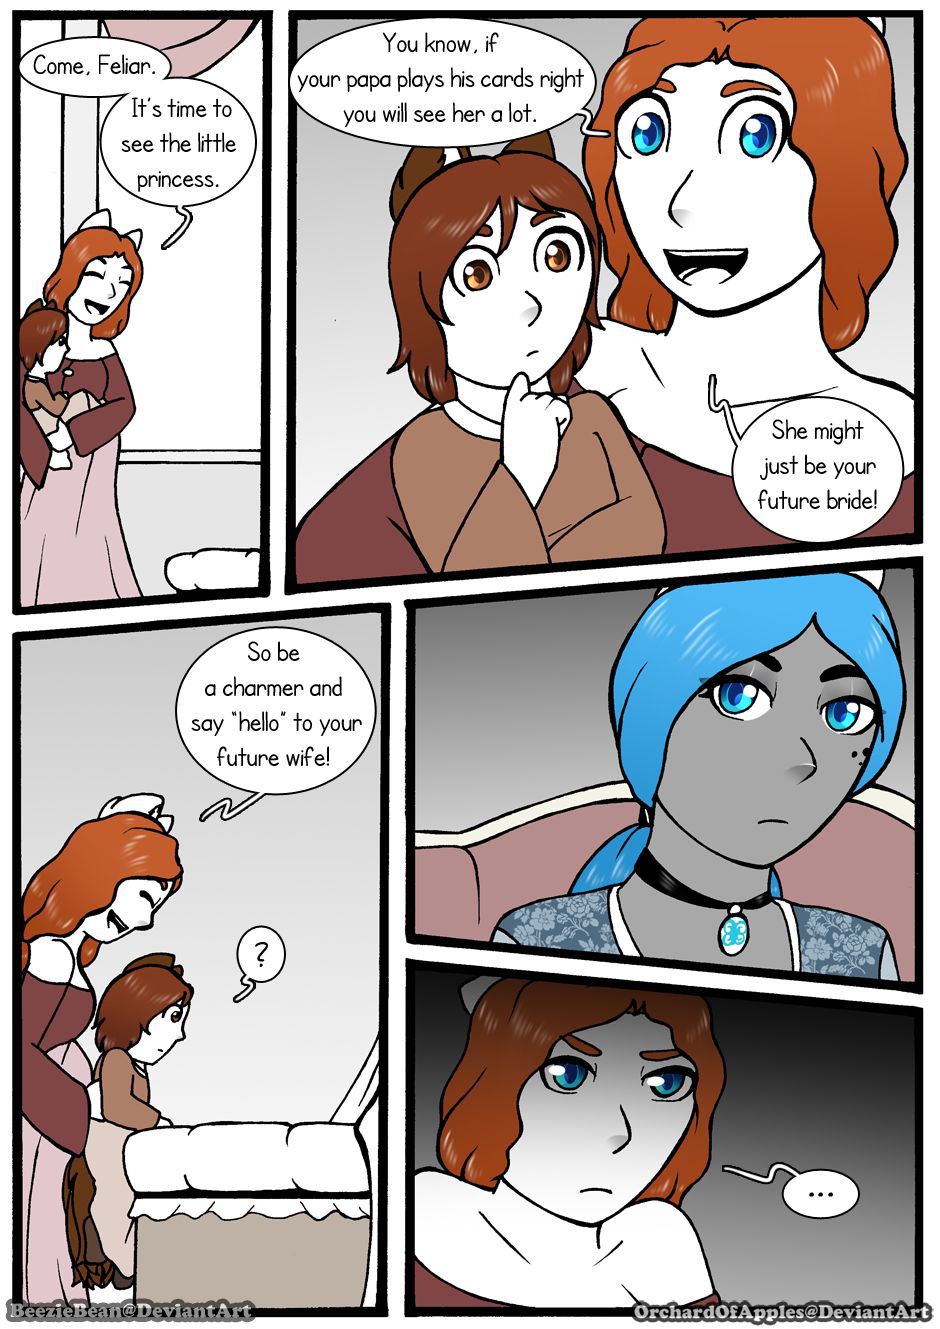 [Jeny-jen94] Between Kings and Queens [Ongoing] 358